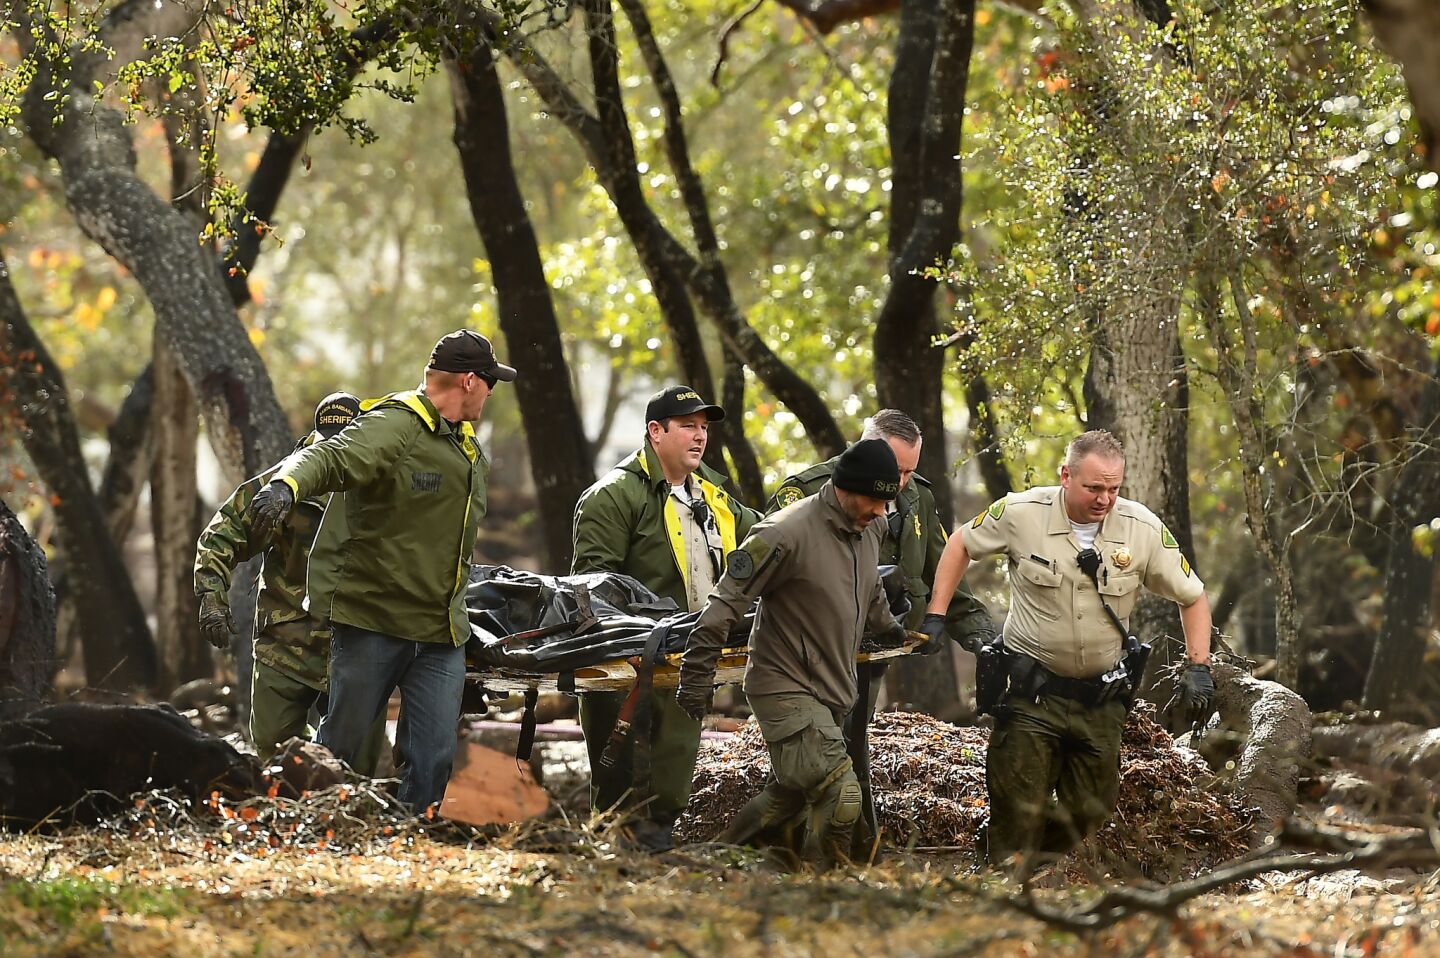 Sheriffs deputies carry a body from the debris near Hot Springs Road in Montecito after a major storm hit the burn area Tuesday.